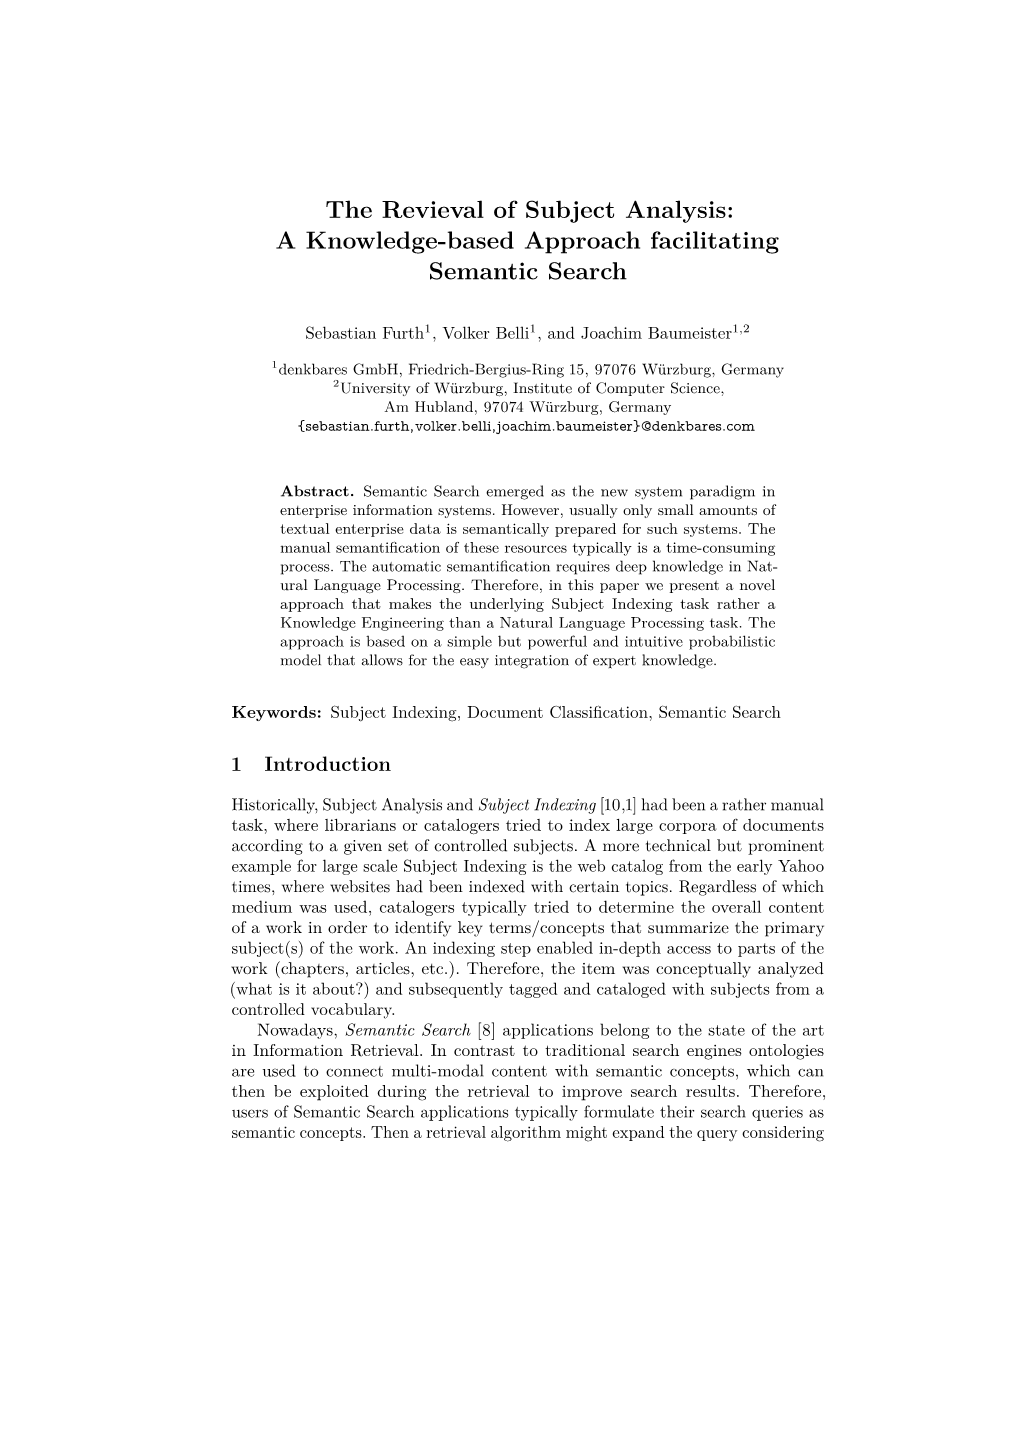 The Revieval of Subject Analysis: a Knowledge-Based Approach Facilitating Semantic Search